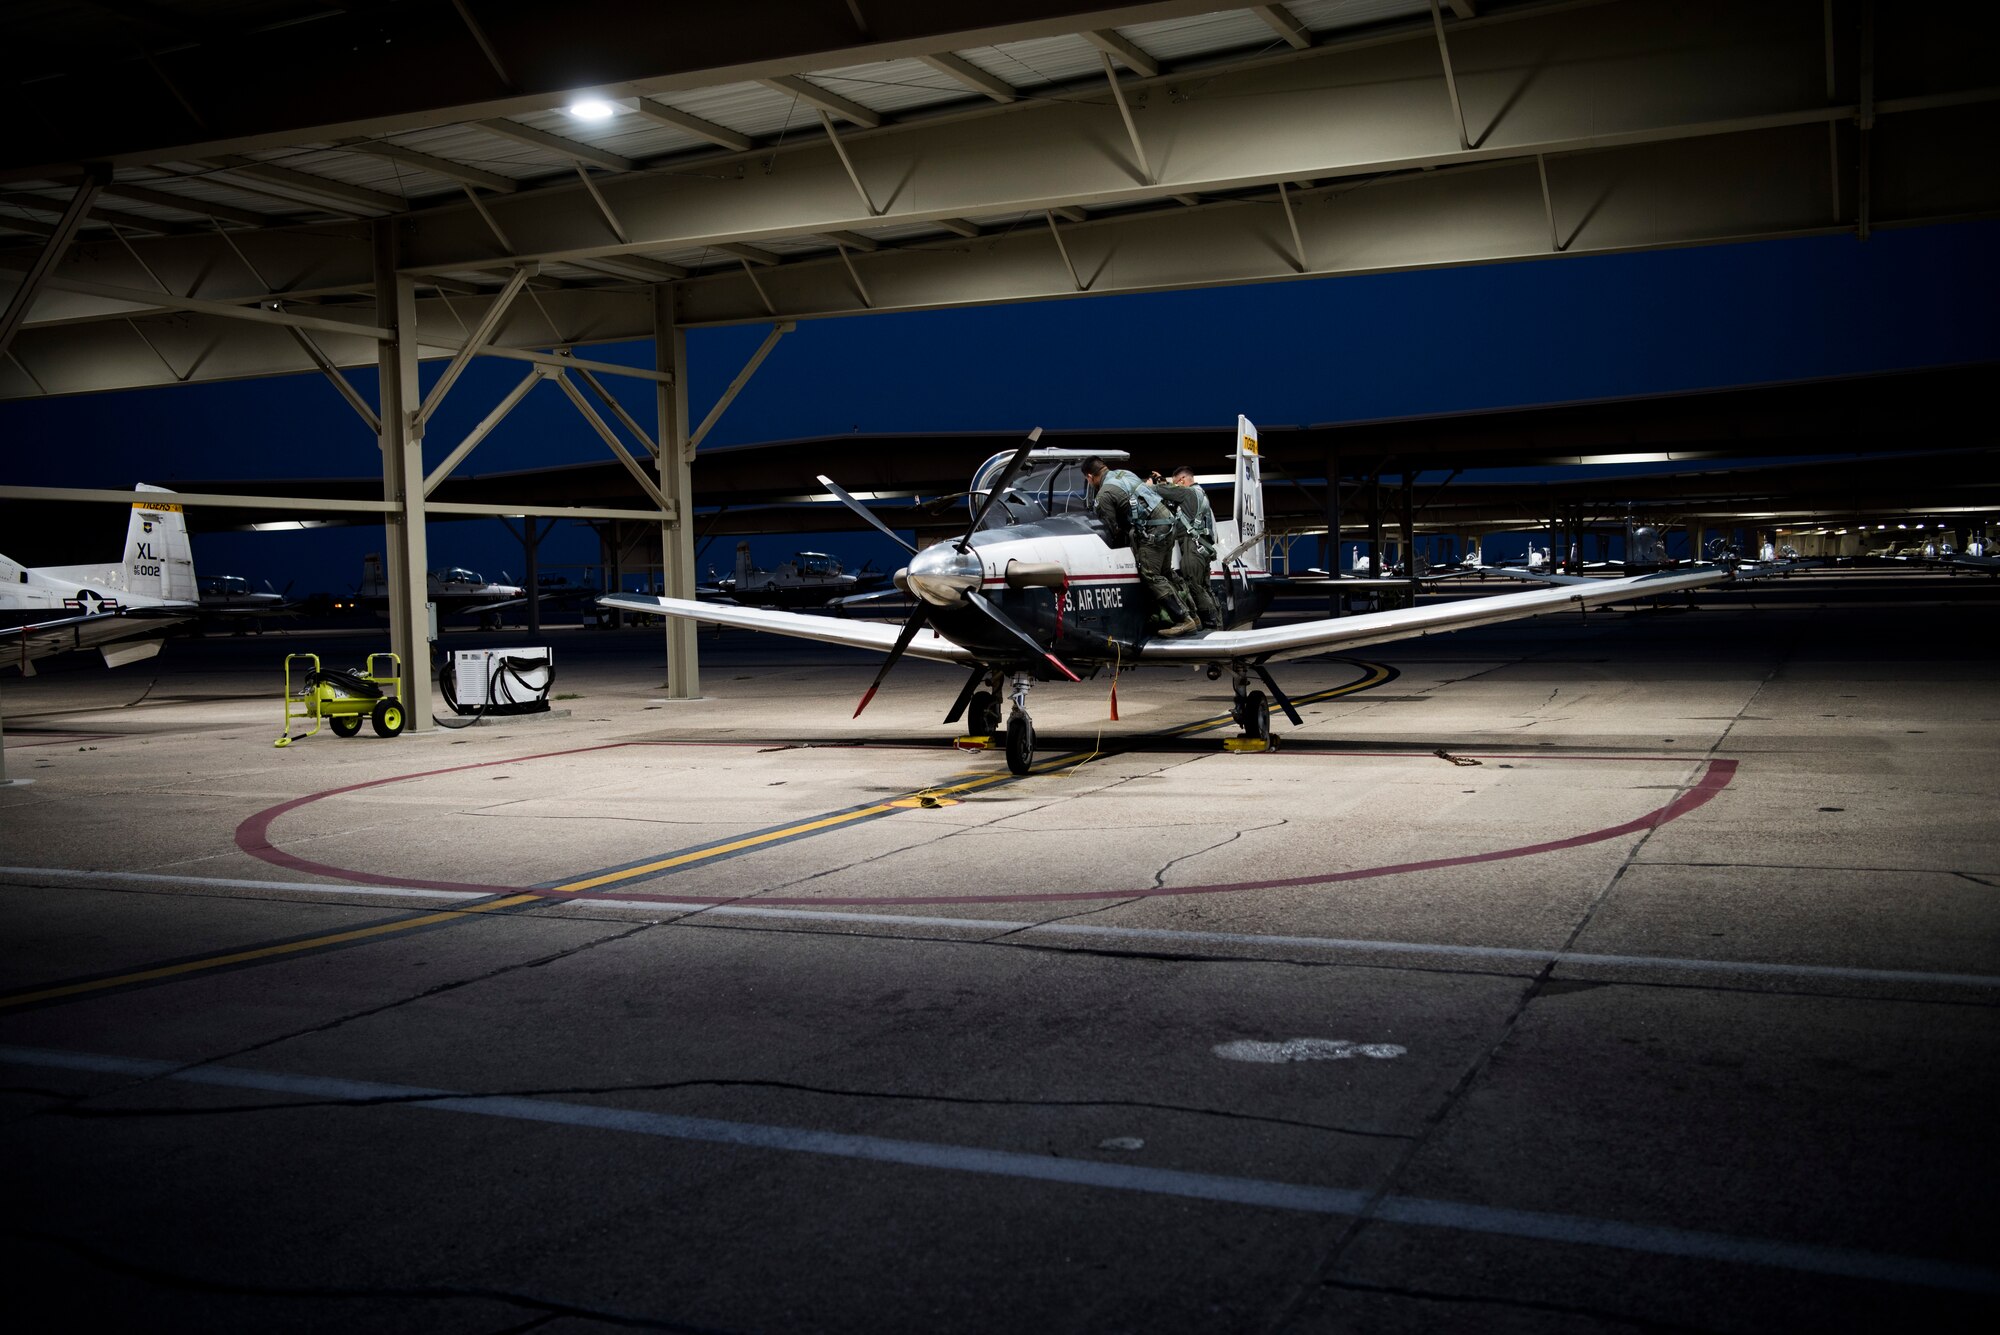 First Lt. Benjamin Peña and 1st Lt. Nicholas Myers, 85th Flying Training Squadron instructor pilots, place items inside a T-6A Texan II before takeoff on Sept. 18, 2019 at Laughlin Air Force Base, Texas. Night flying at a Specialized Undergraduate Pilot Training base allows not only more hours in the sky, but it also provides a variety experience so pilots can become accustomed to instrument flying. (U.S. Air Force photo by Senior Airman Marco A. Gomez)